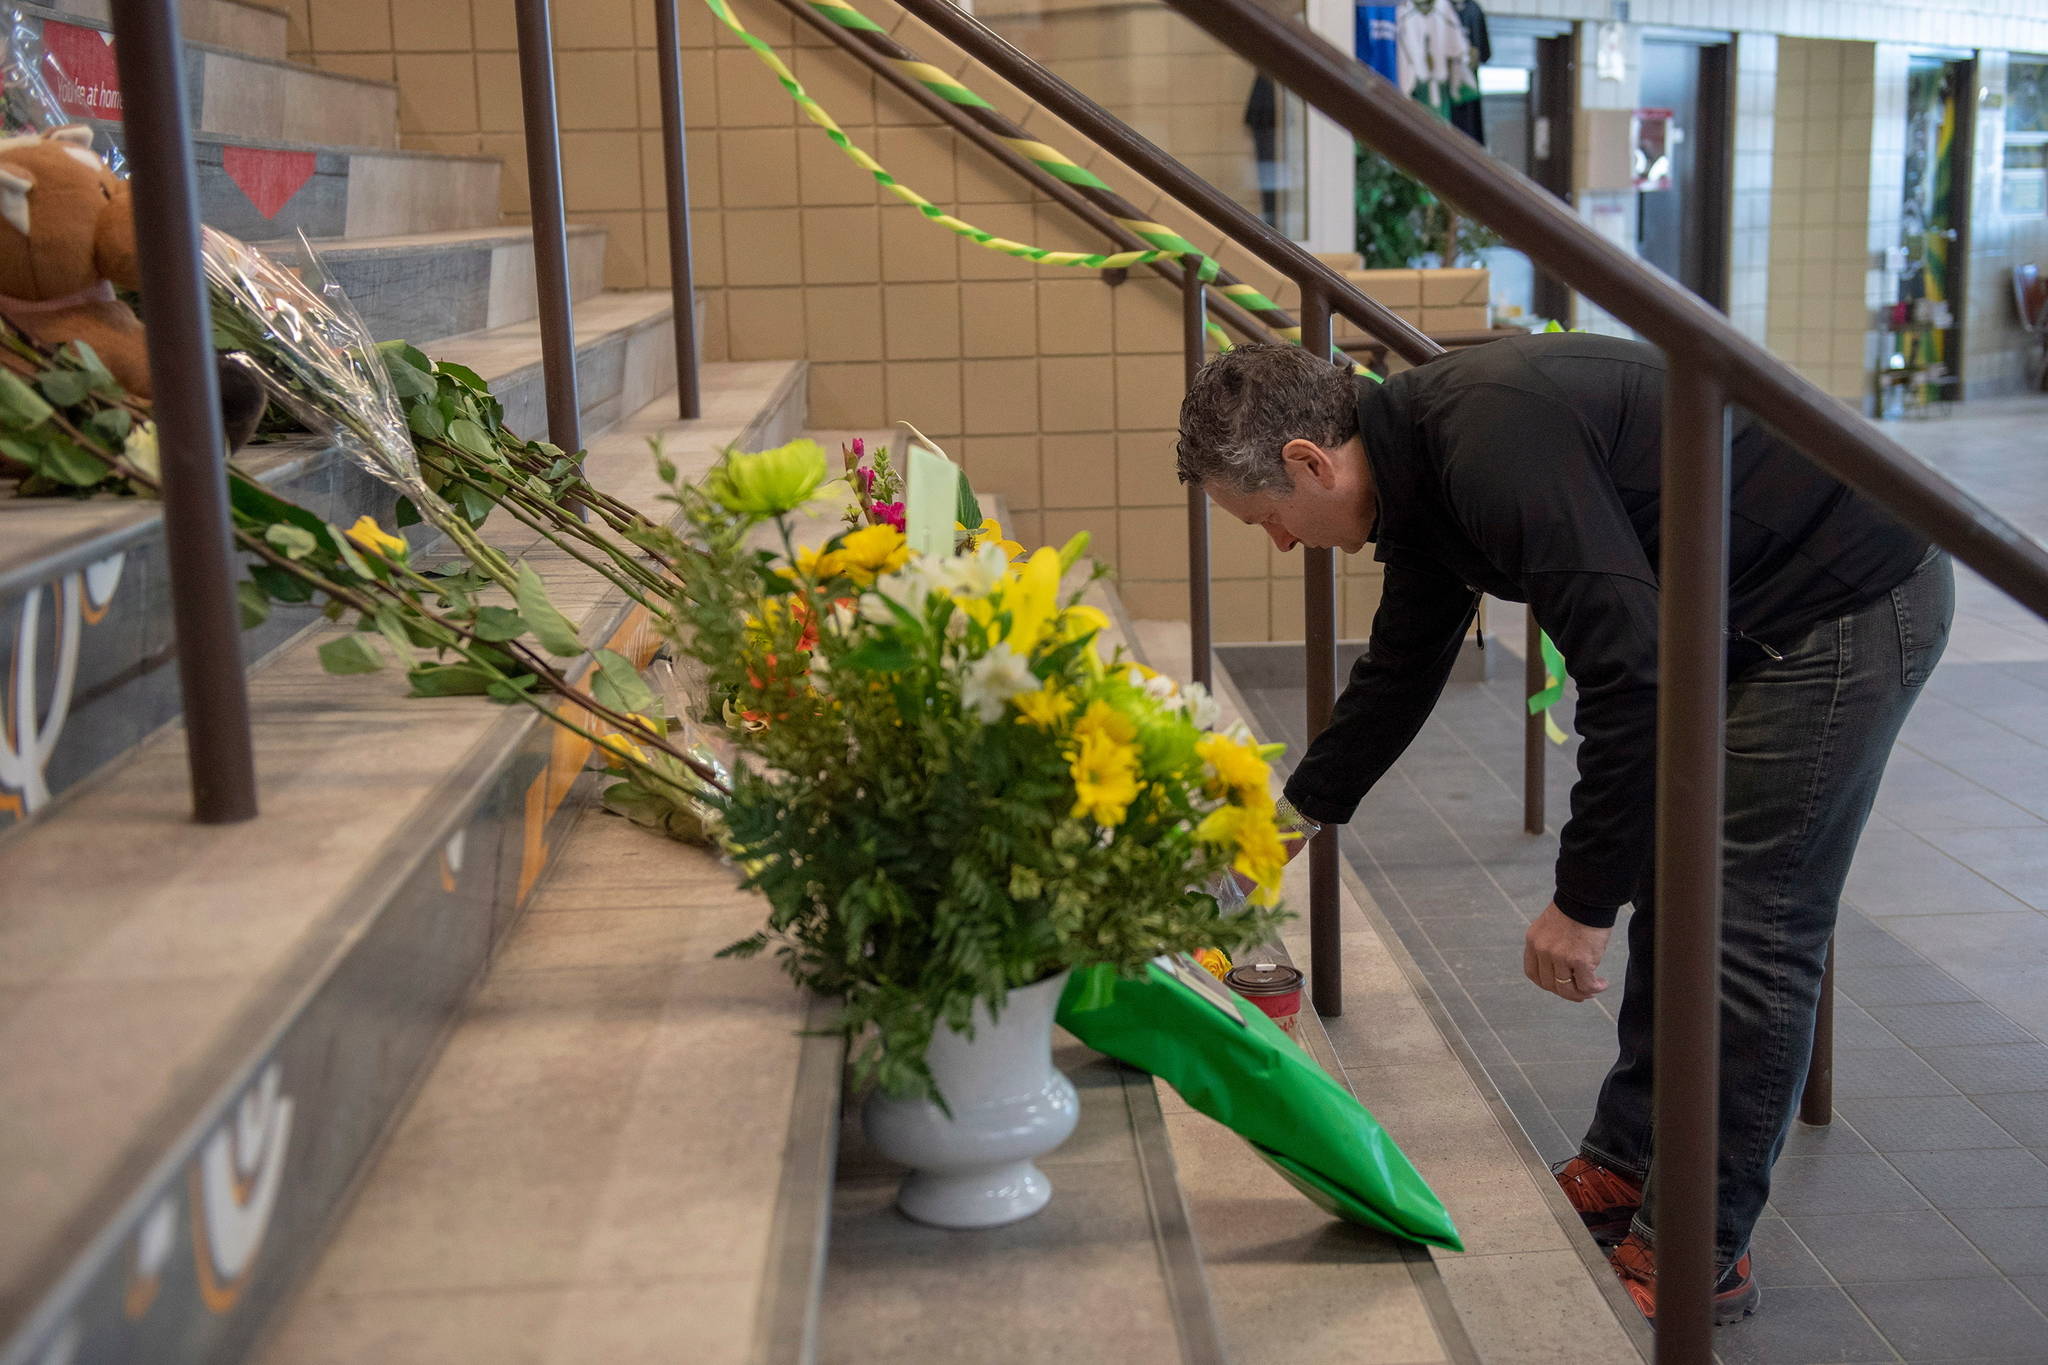 Steve Hogle, President of the Saskatoon Blades places flowers at a memorial at the stairs that lead to Elgar Petersen Arena in Humboldt, Saskatchewan, on Saturday, April 7, 2018. (Liam Richards/The Canadian Press via AP)